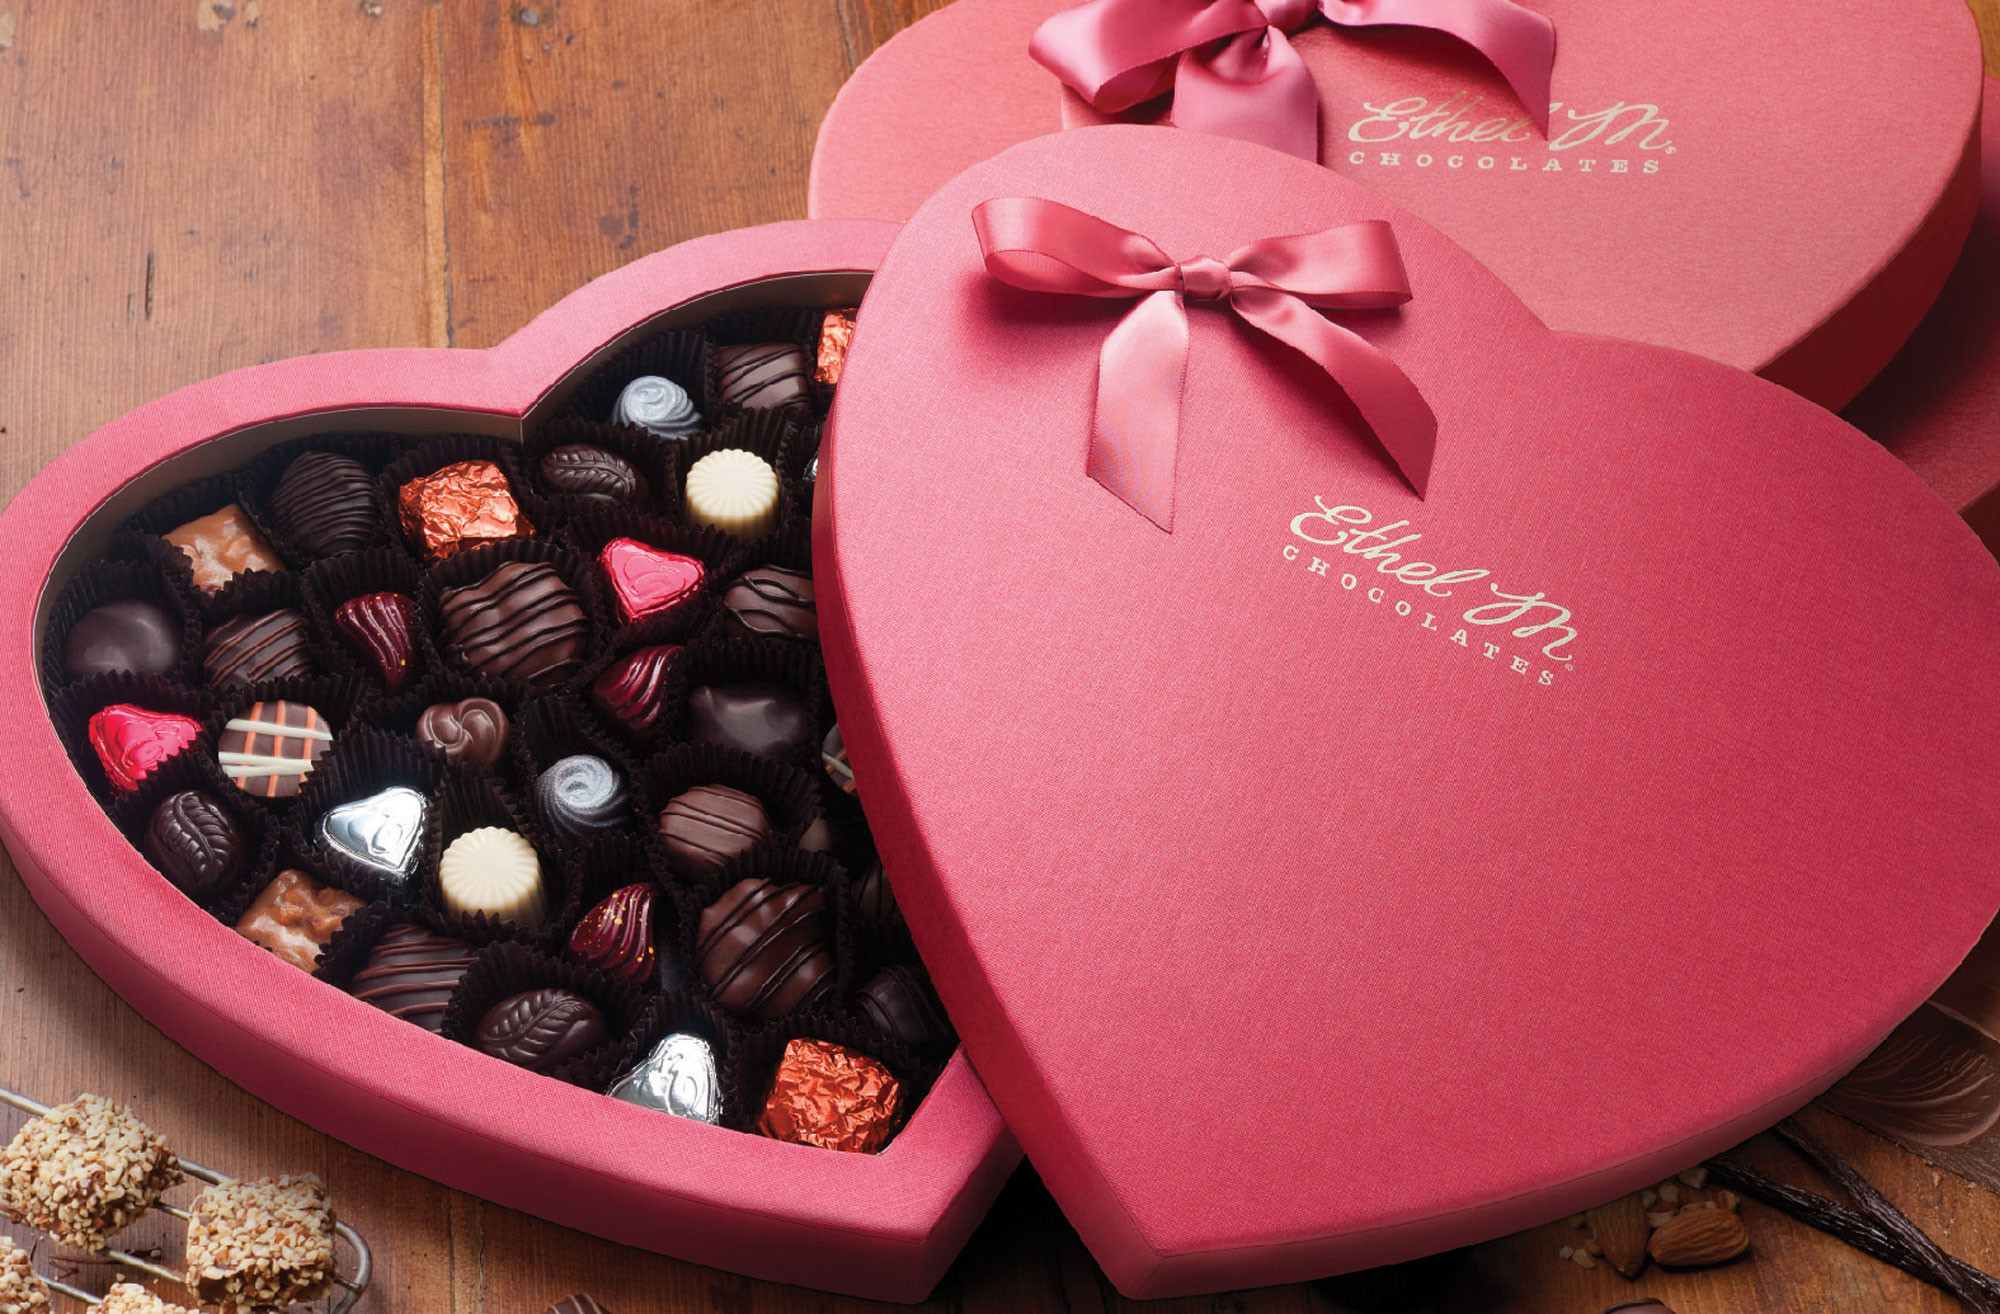 Valentines Day Chocolate Gift
 12 Best Valentines Gift Ideas For Her in This 2016